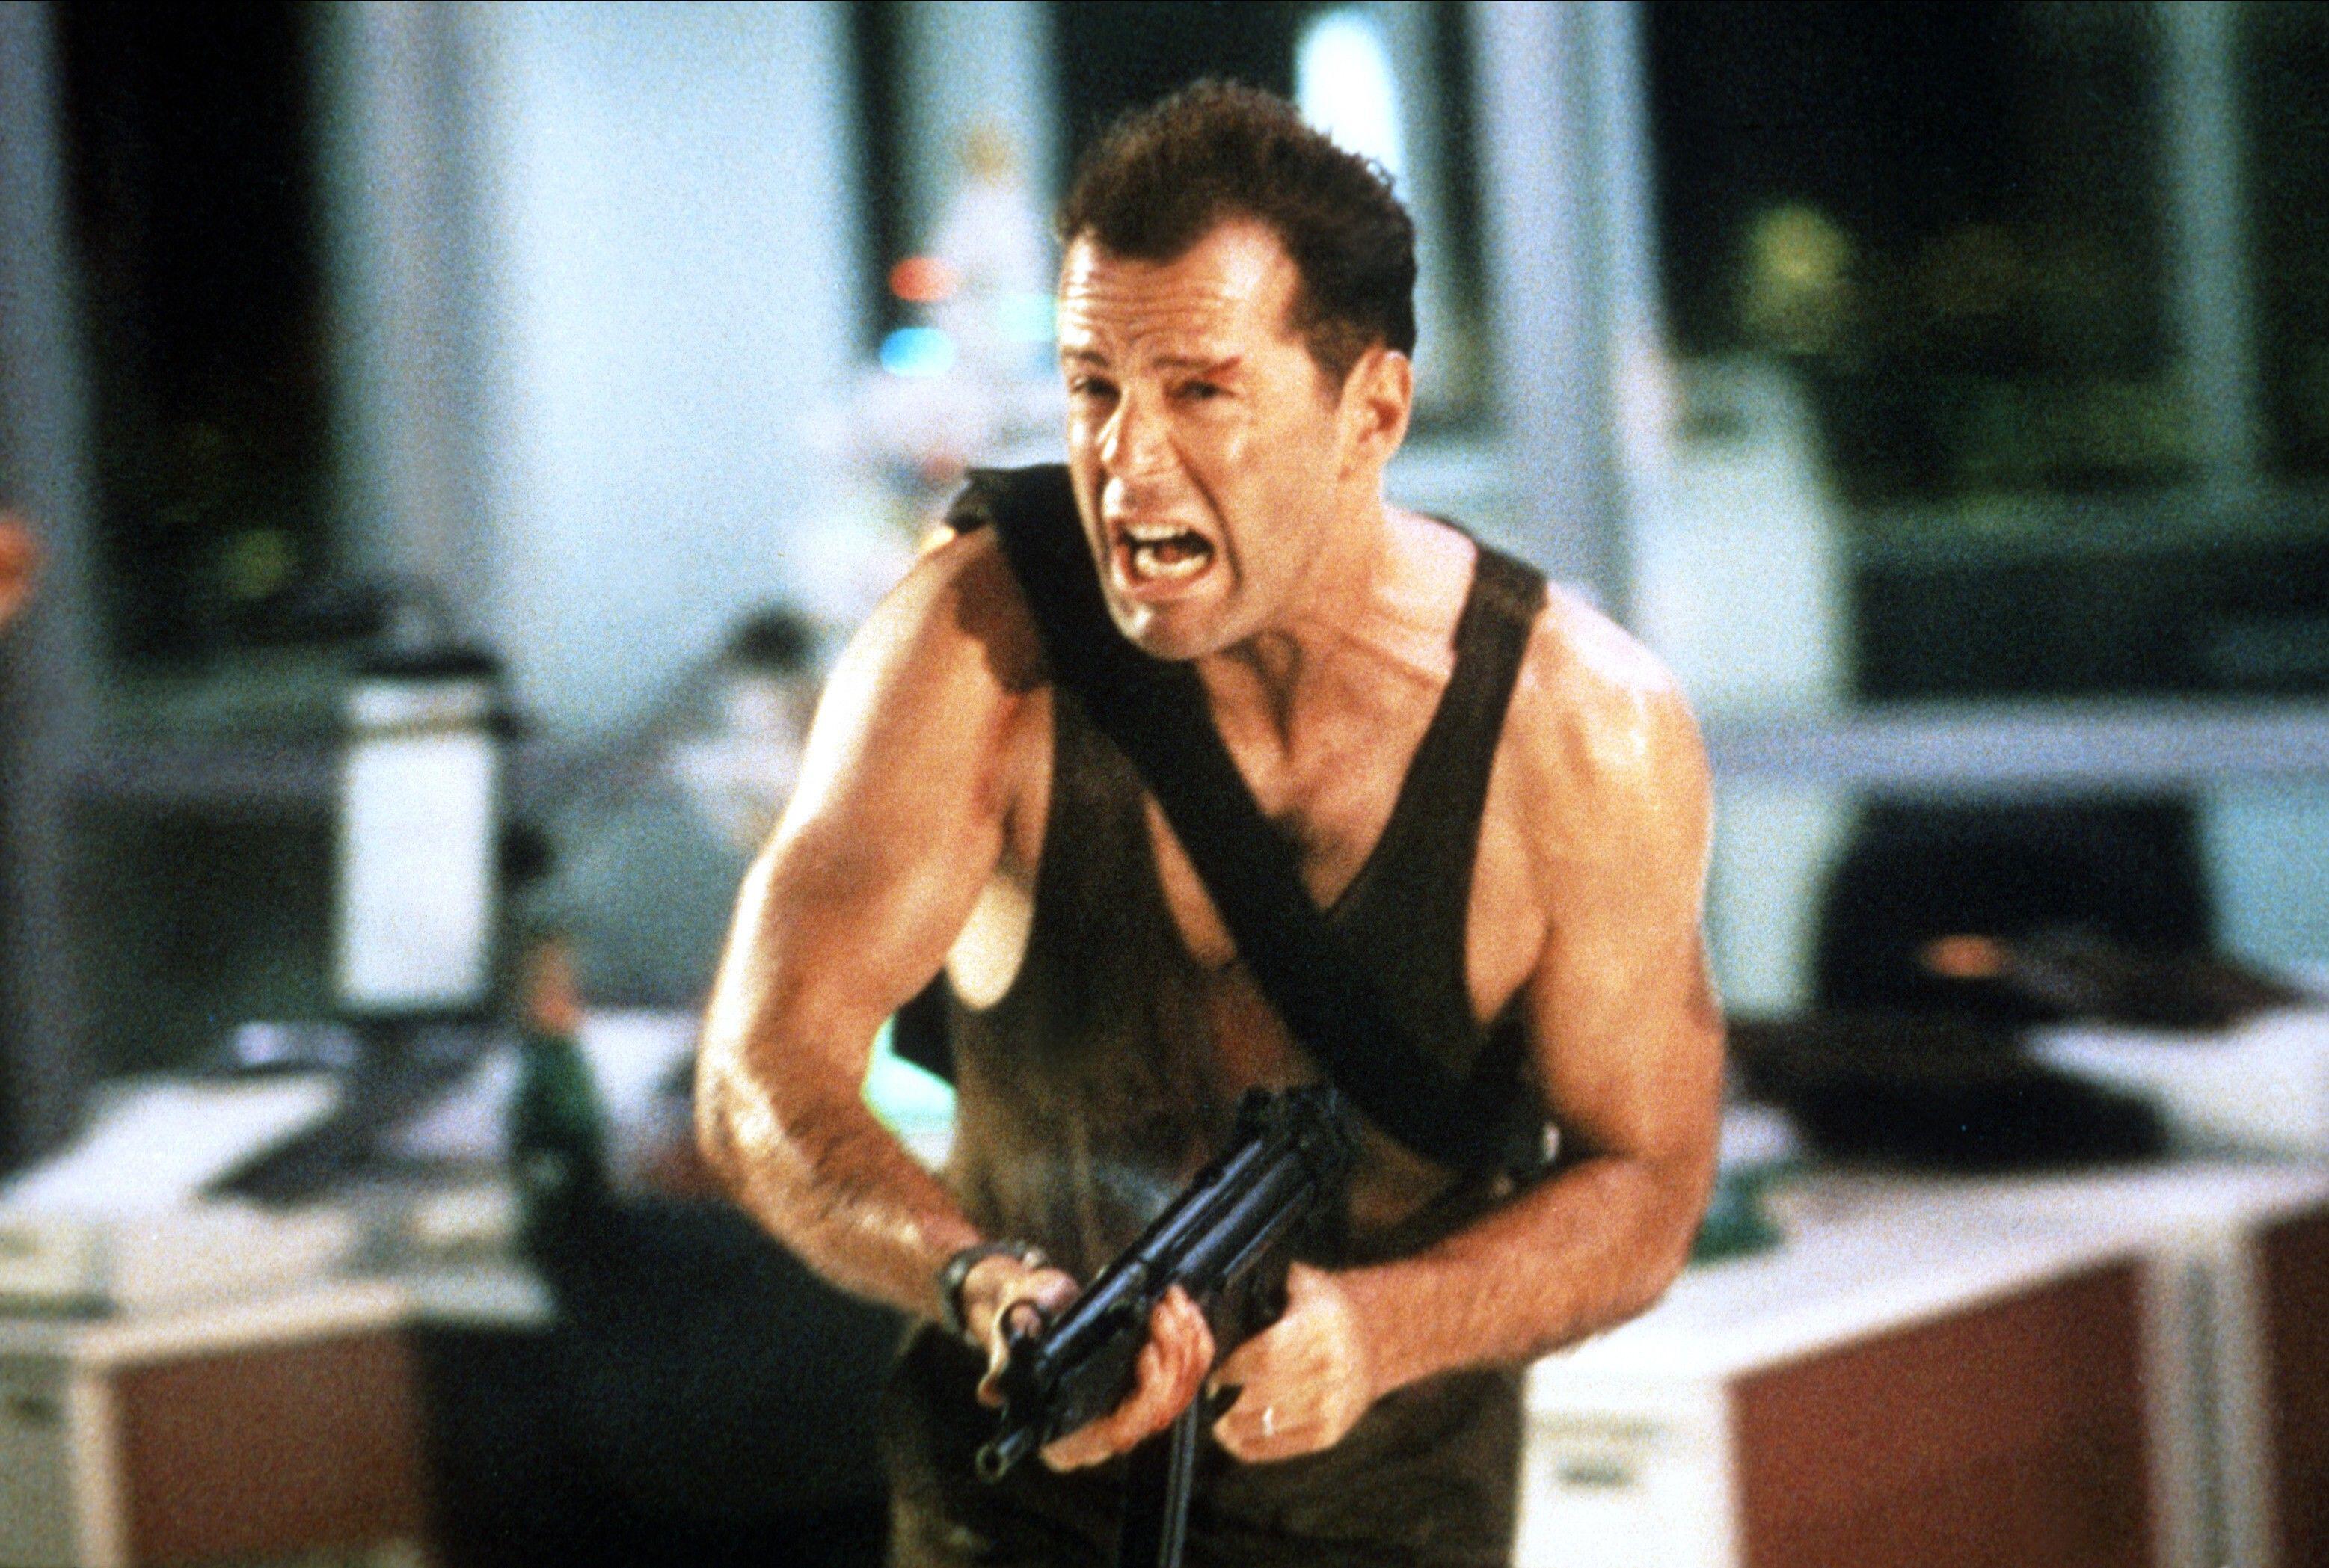 Bruce is well loved for his film career - such as roles like Die Hard